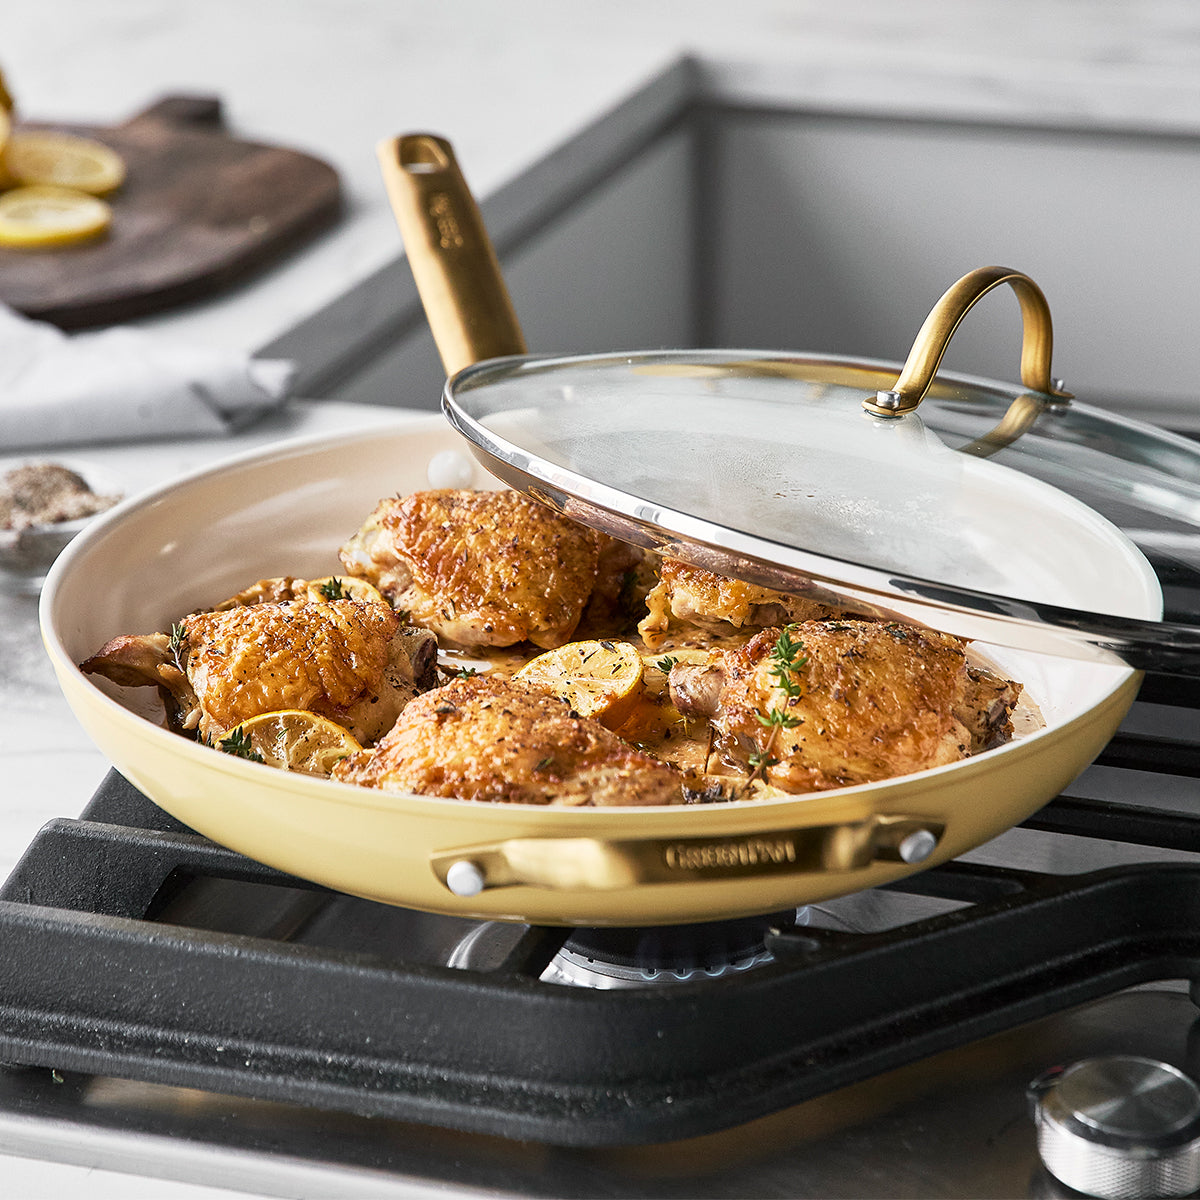 12 Skillet with Helper Handle & Cover